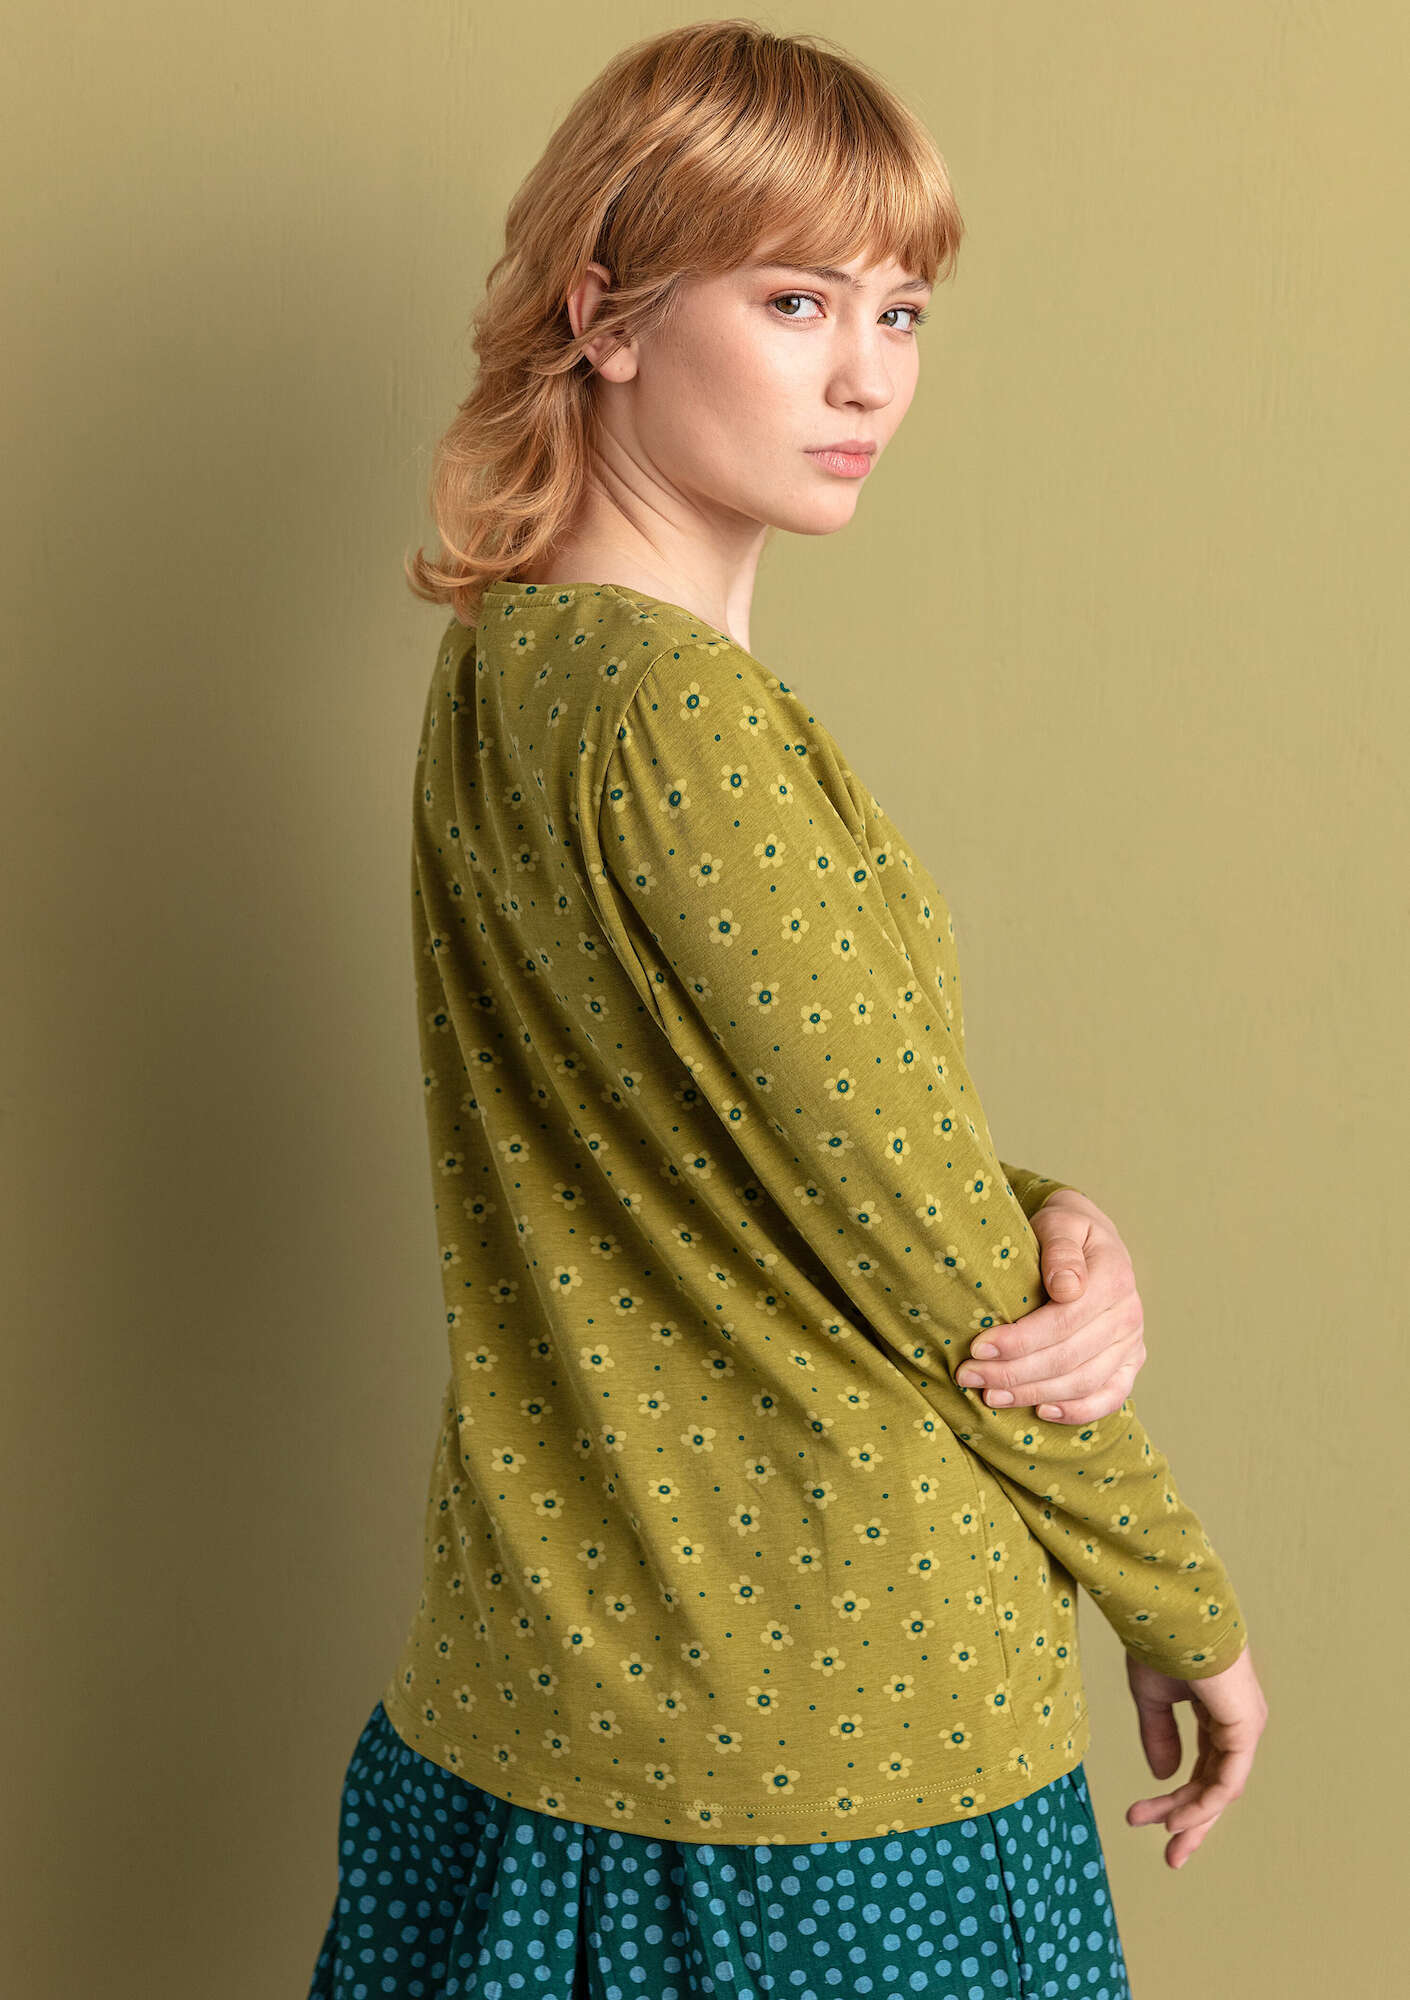 “Pytte” jersey top in organic cotton/spandex avocado/patterned